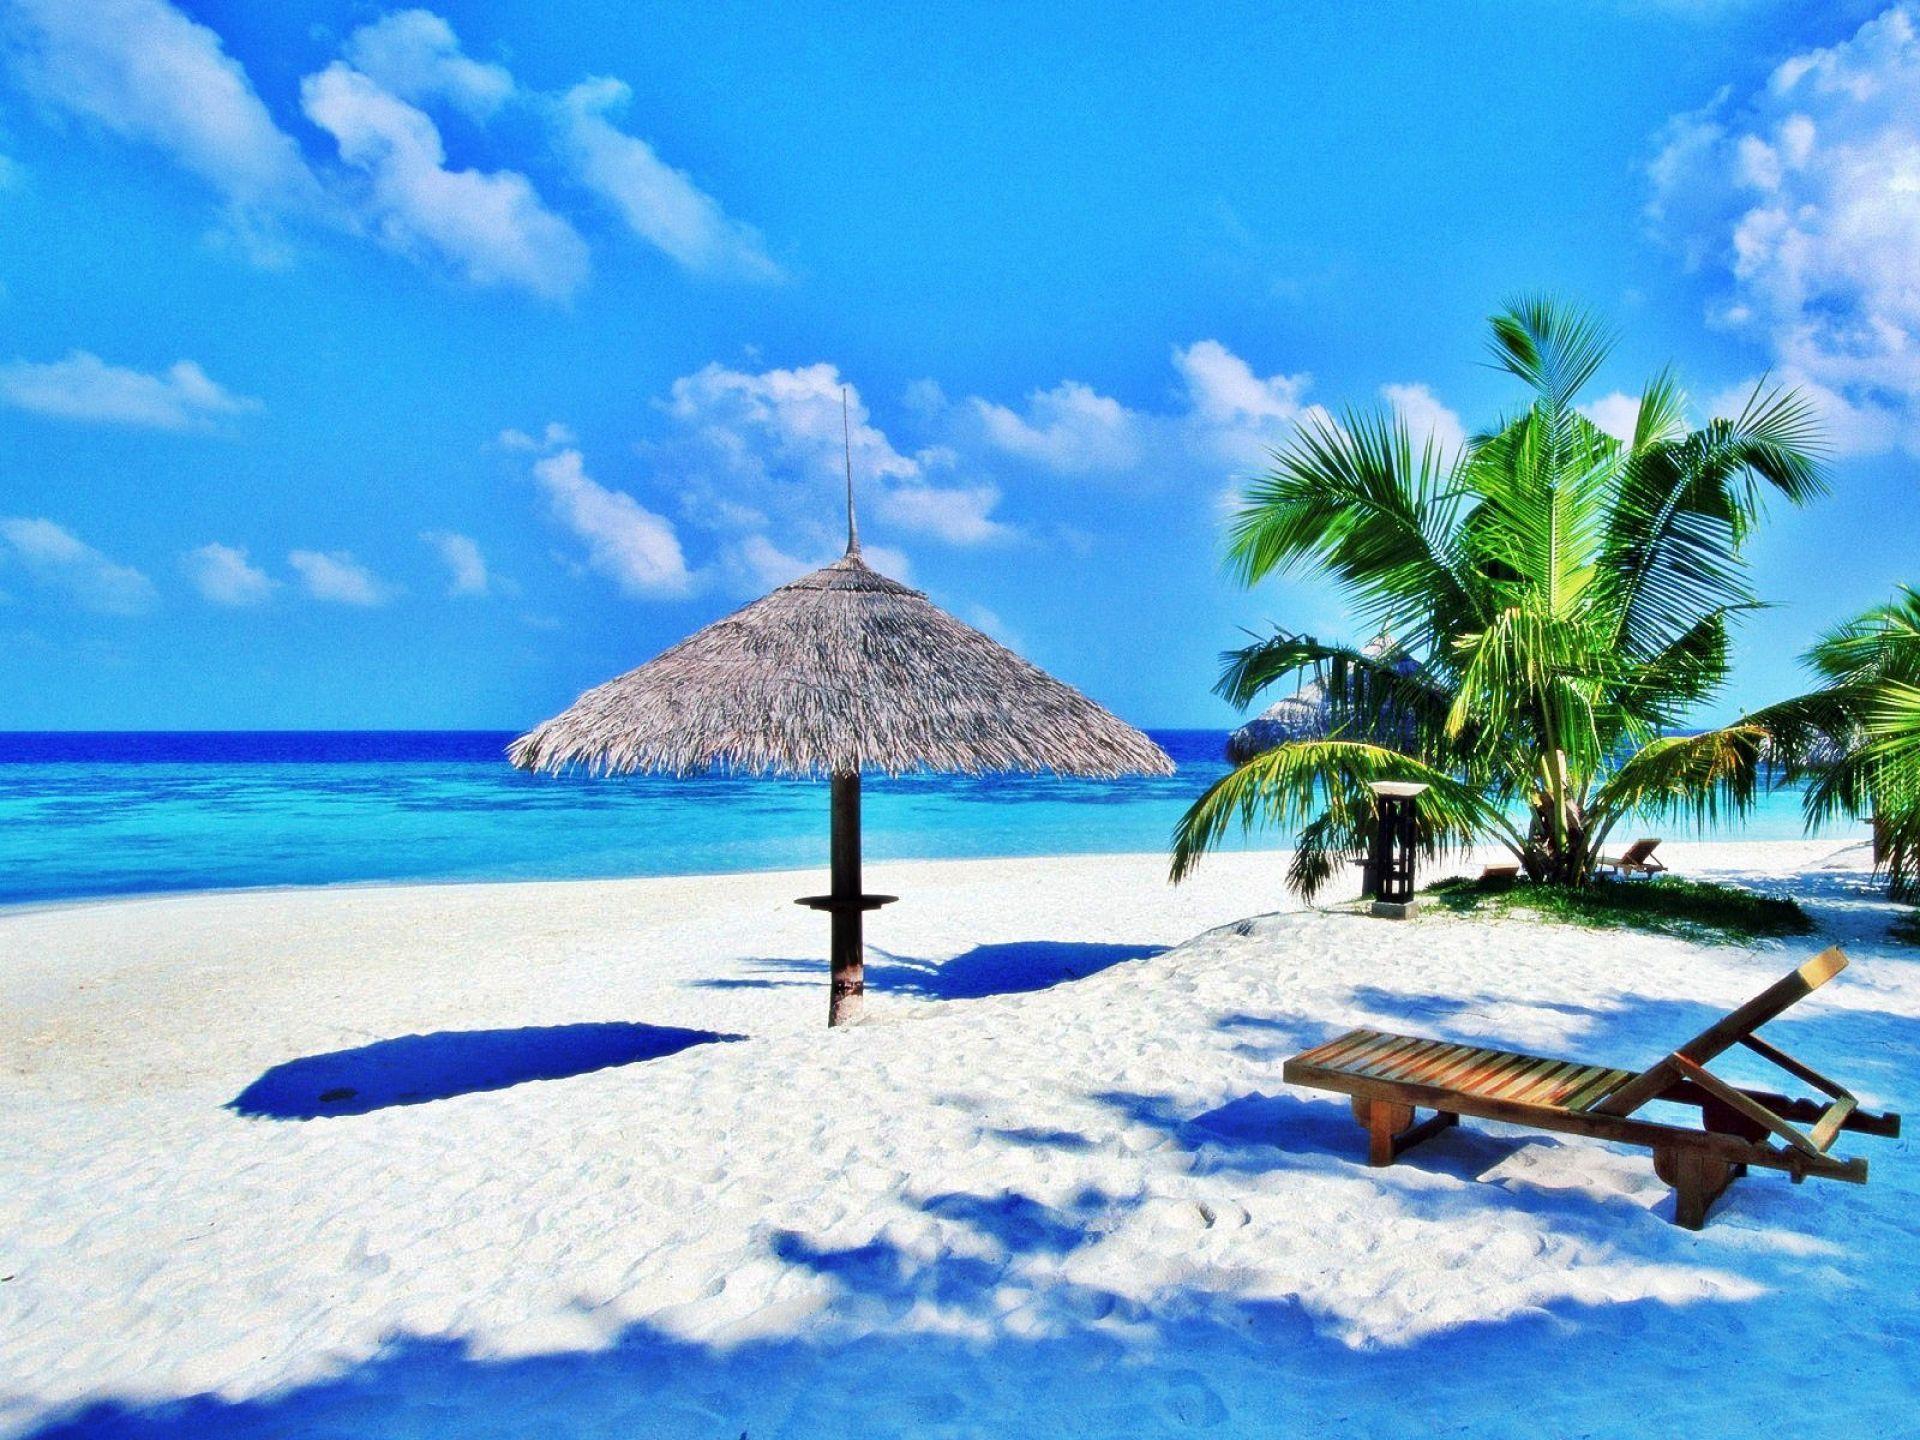 Best Beaches In The World Wallpapers Hd Widescreen 11 HD Wallpapers